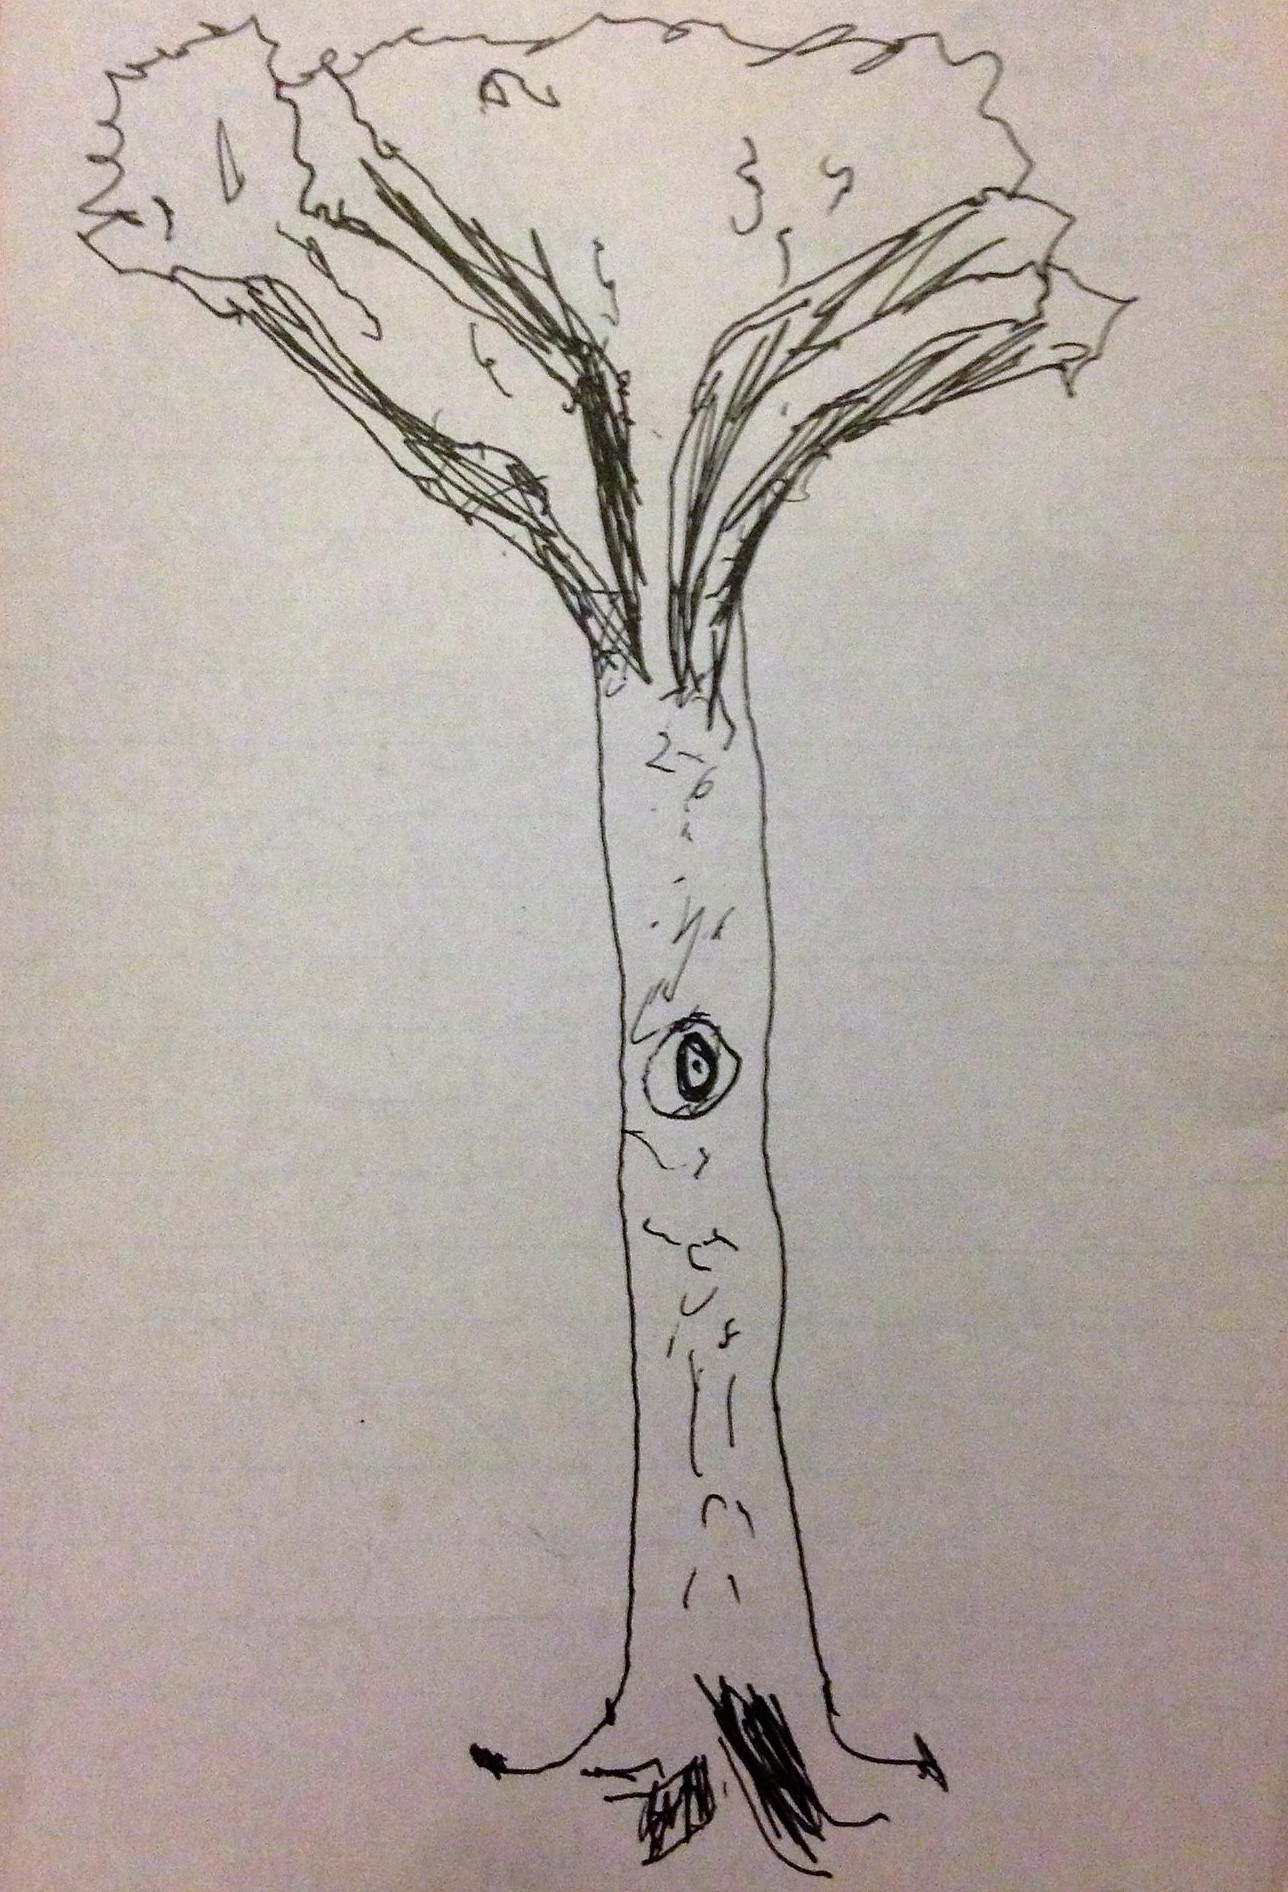 Line drawing of tree by a child